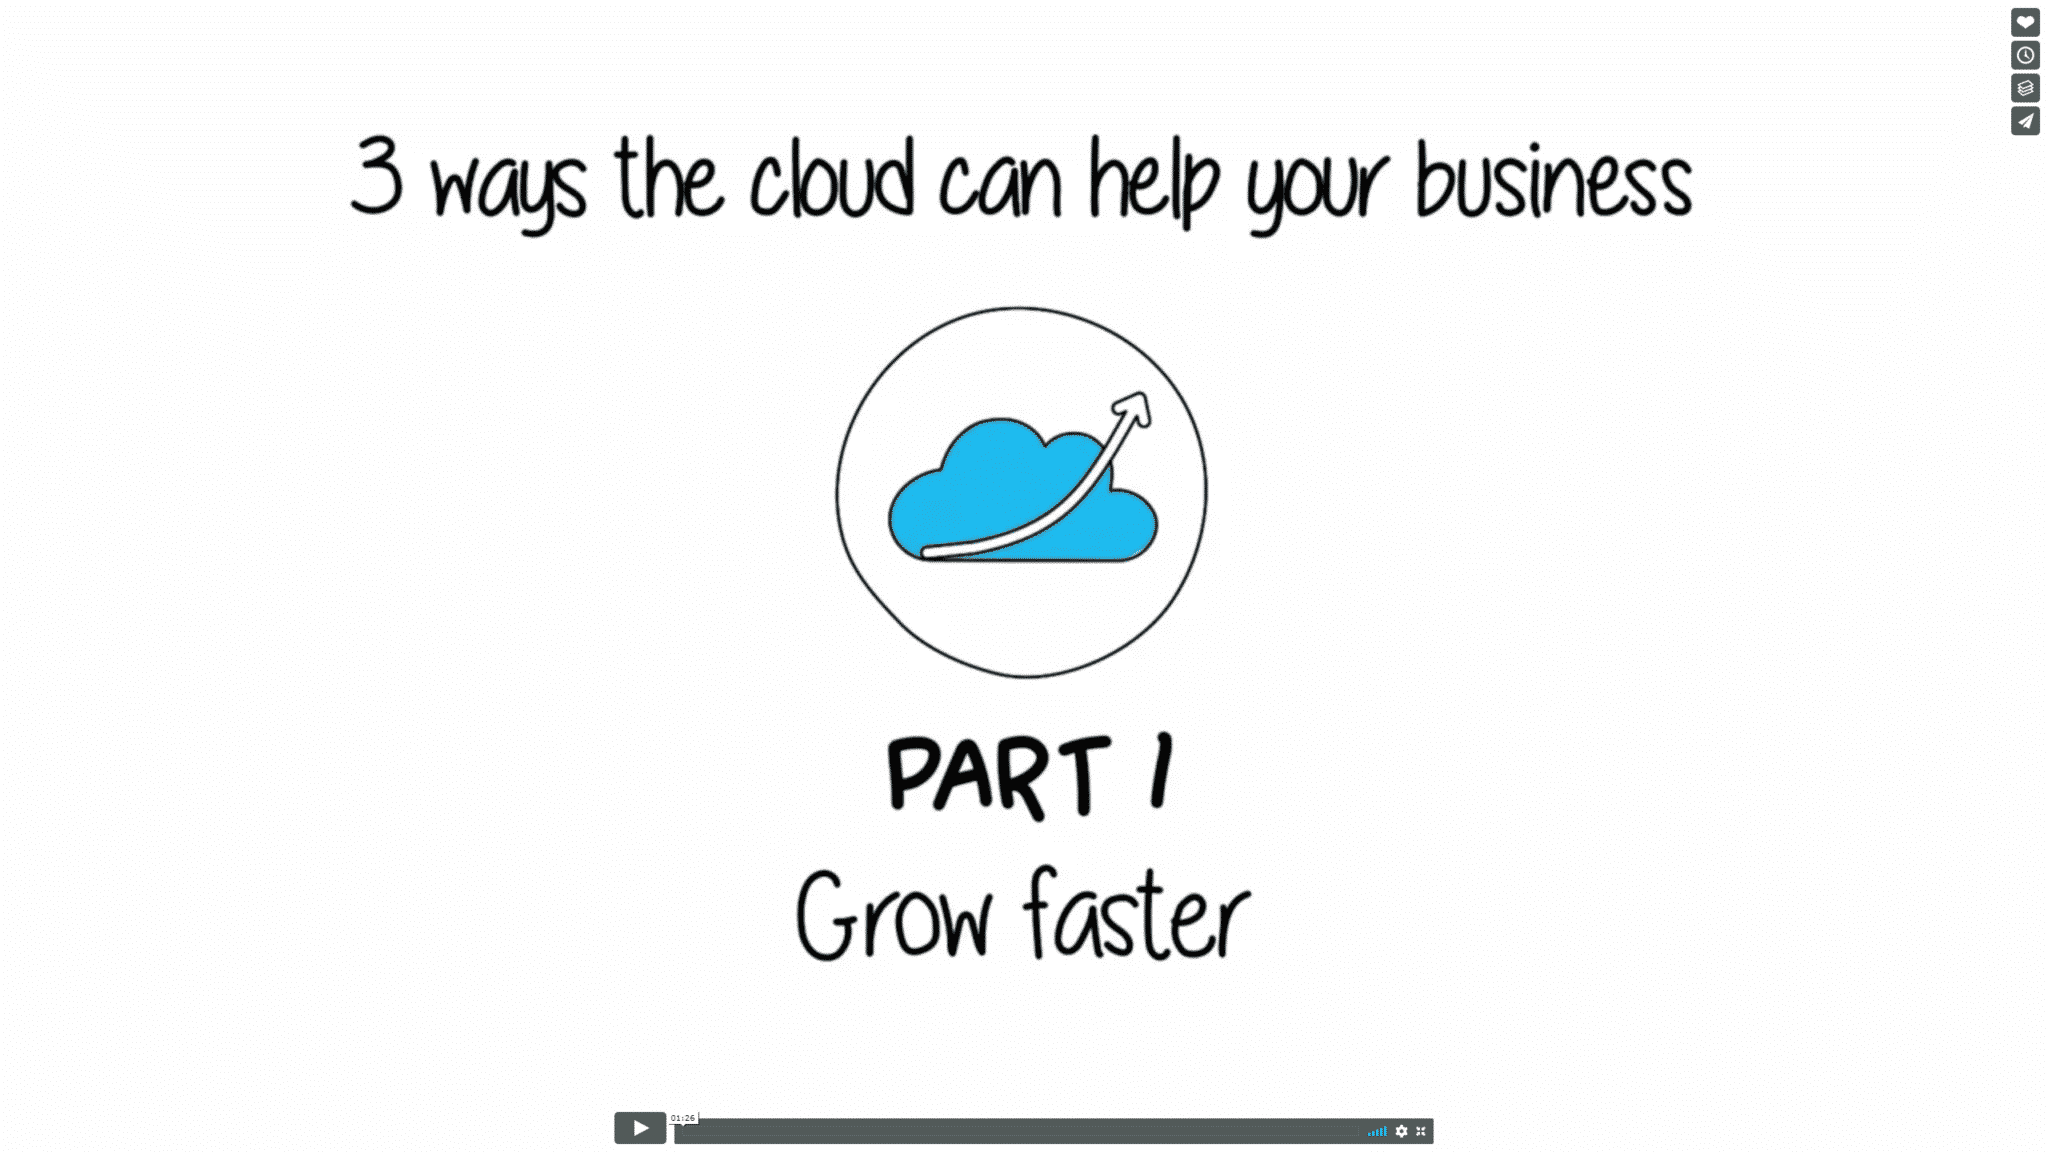 3 ways the cloud can help your business Part 1